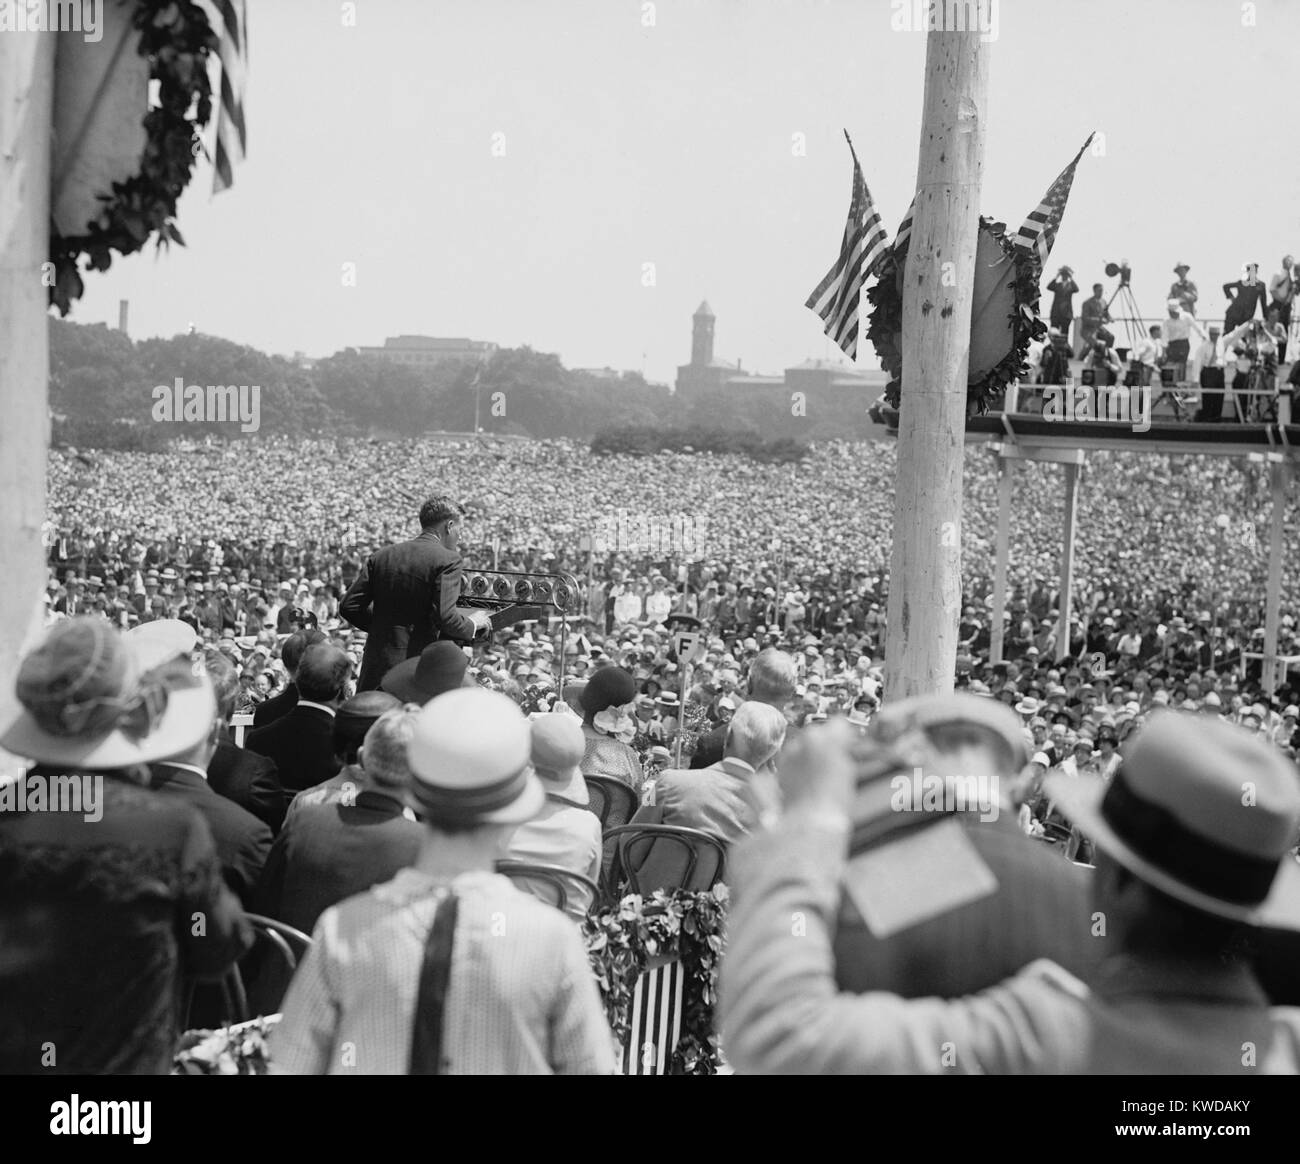 Charles Lindbergh addresses a massive crowd at the Washington Monument, June 11, 1927. His address was broadcast over the radio. Note the cameramen at a raised stand at right (BSLOC 2016 10 155) Stock Photo